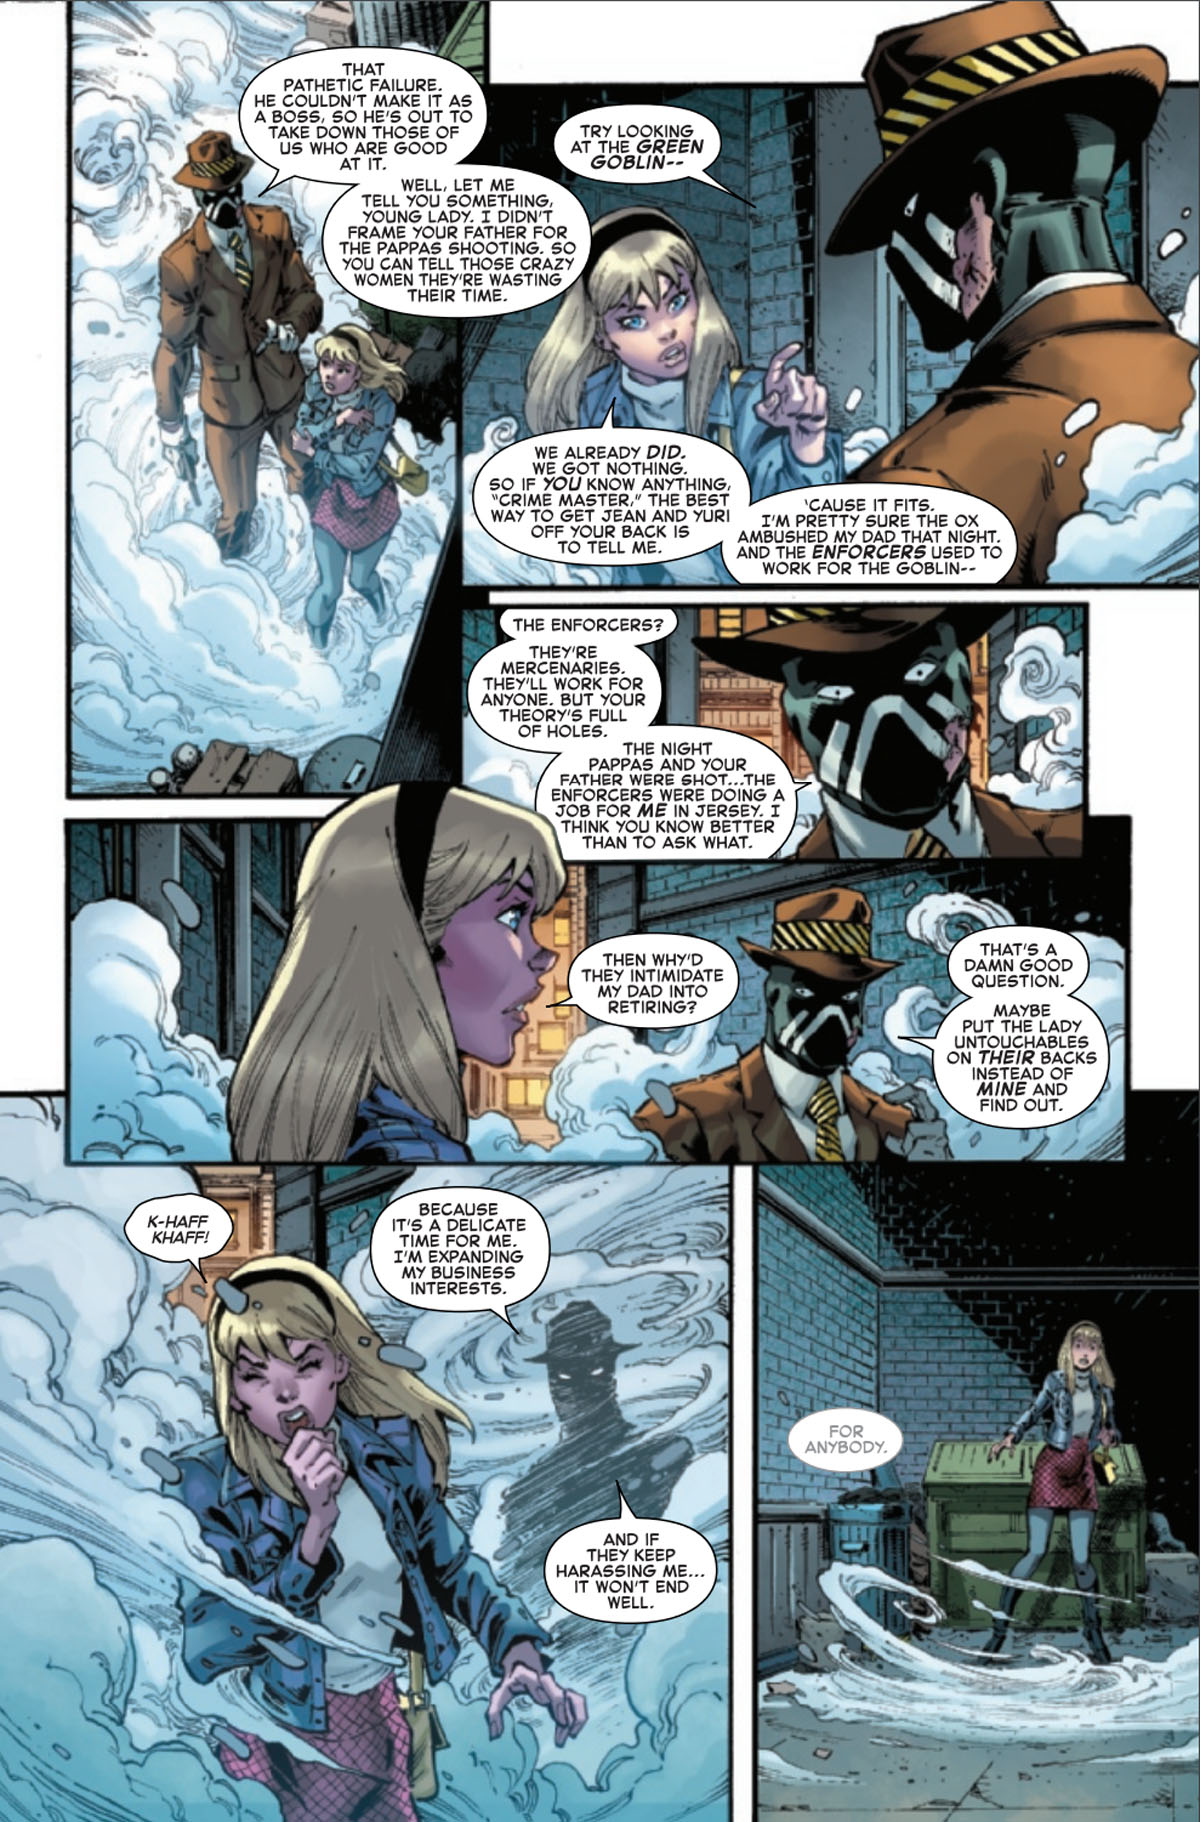 Giant-Size Gwen Stacy #1 preview page 3